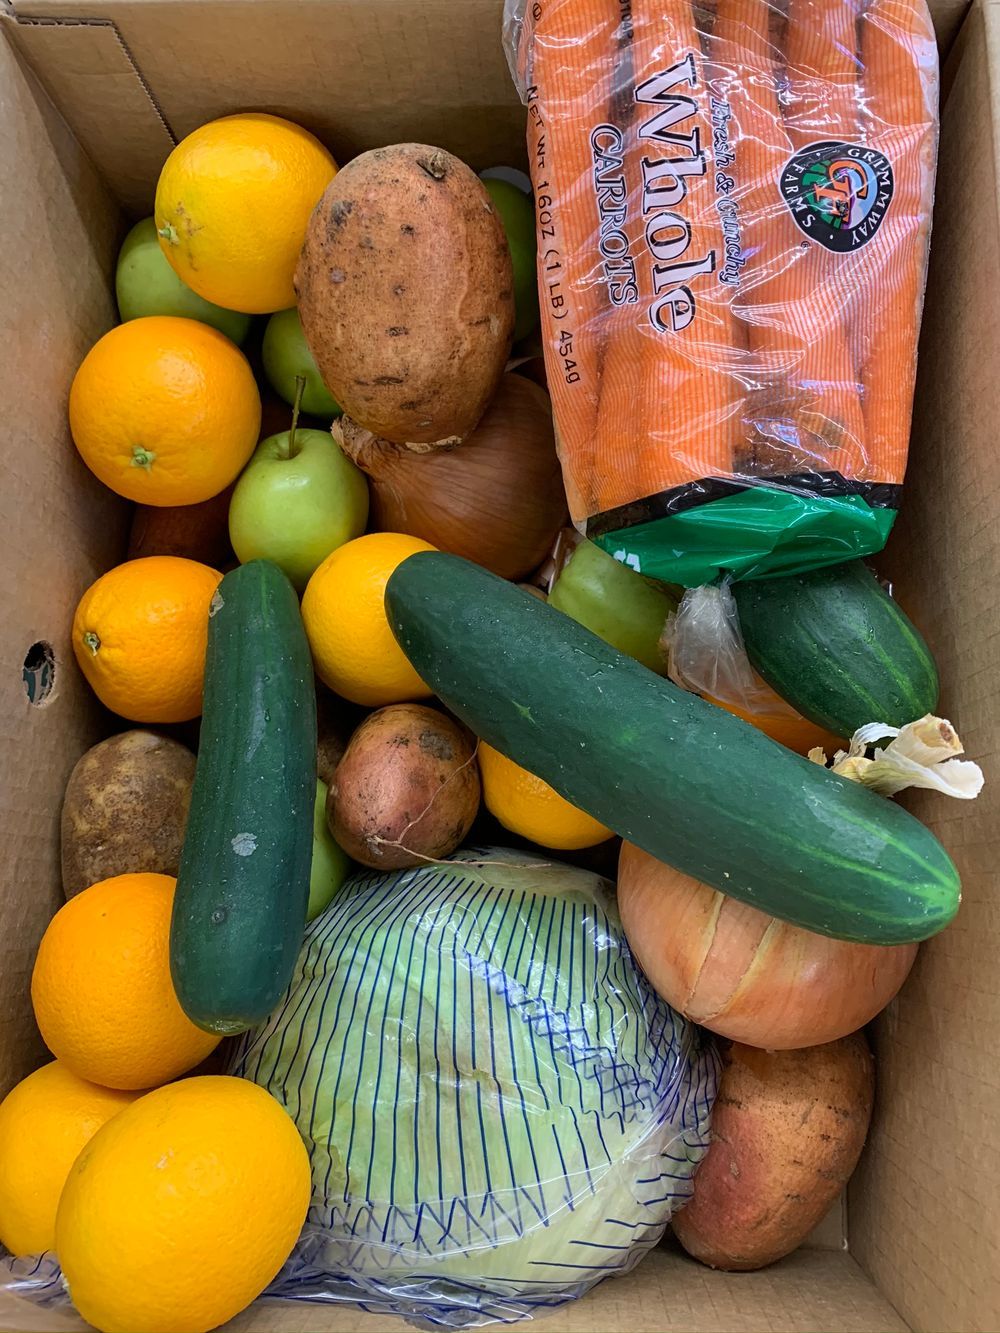 A crate of vegetables and fruits is shown, including cucumbers, oranges, pears, potatoes and carrots.